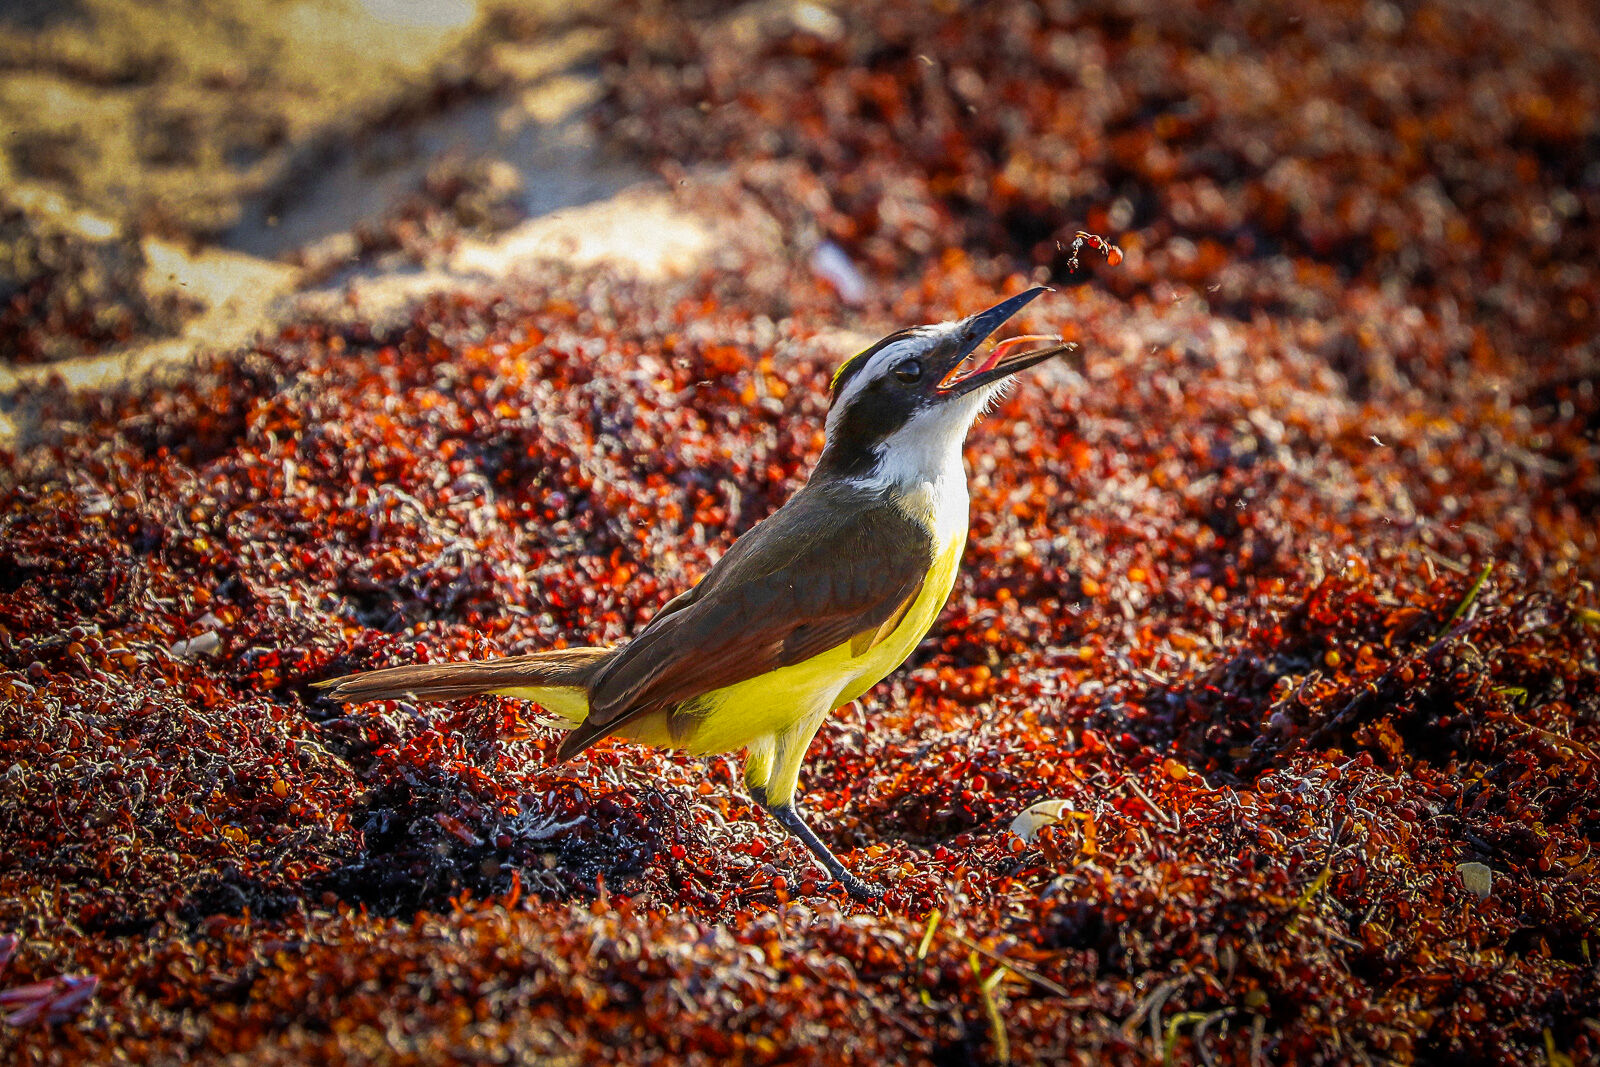 Great Kiskadee hunting on the beach for ants and other insects.  When he found one, he threw it up in the air and then ate it...